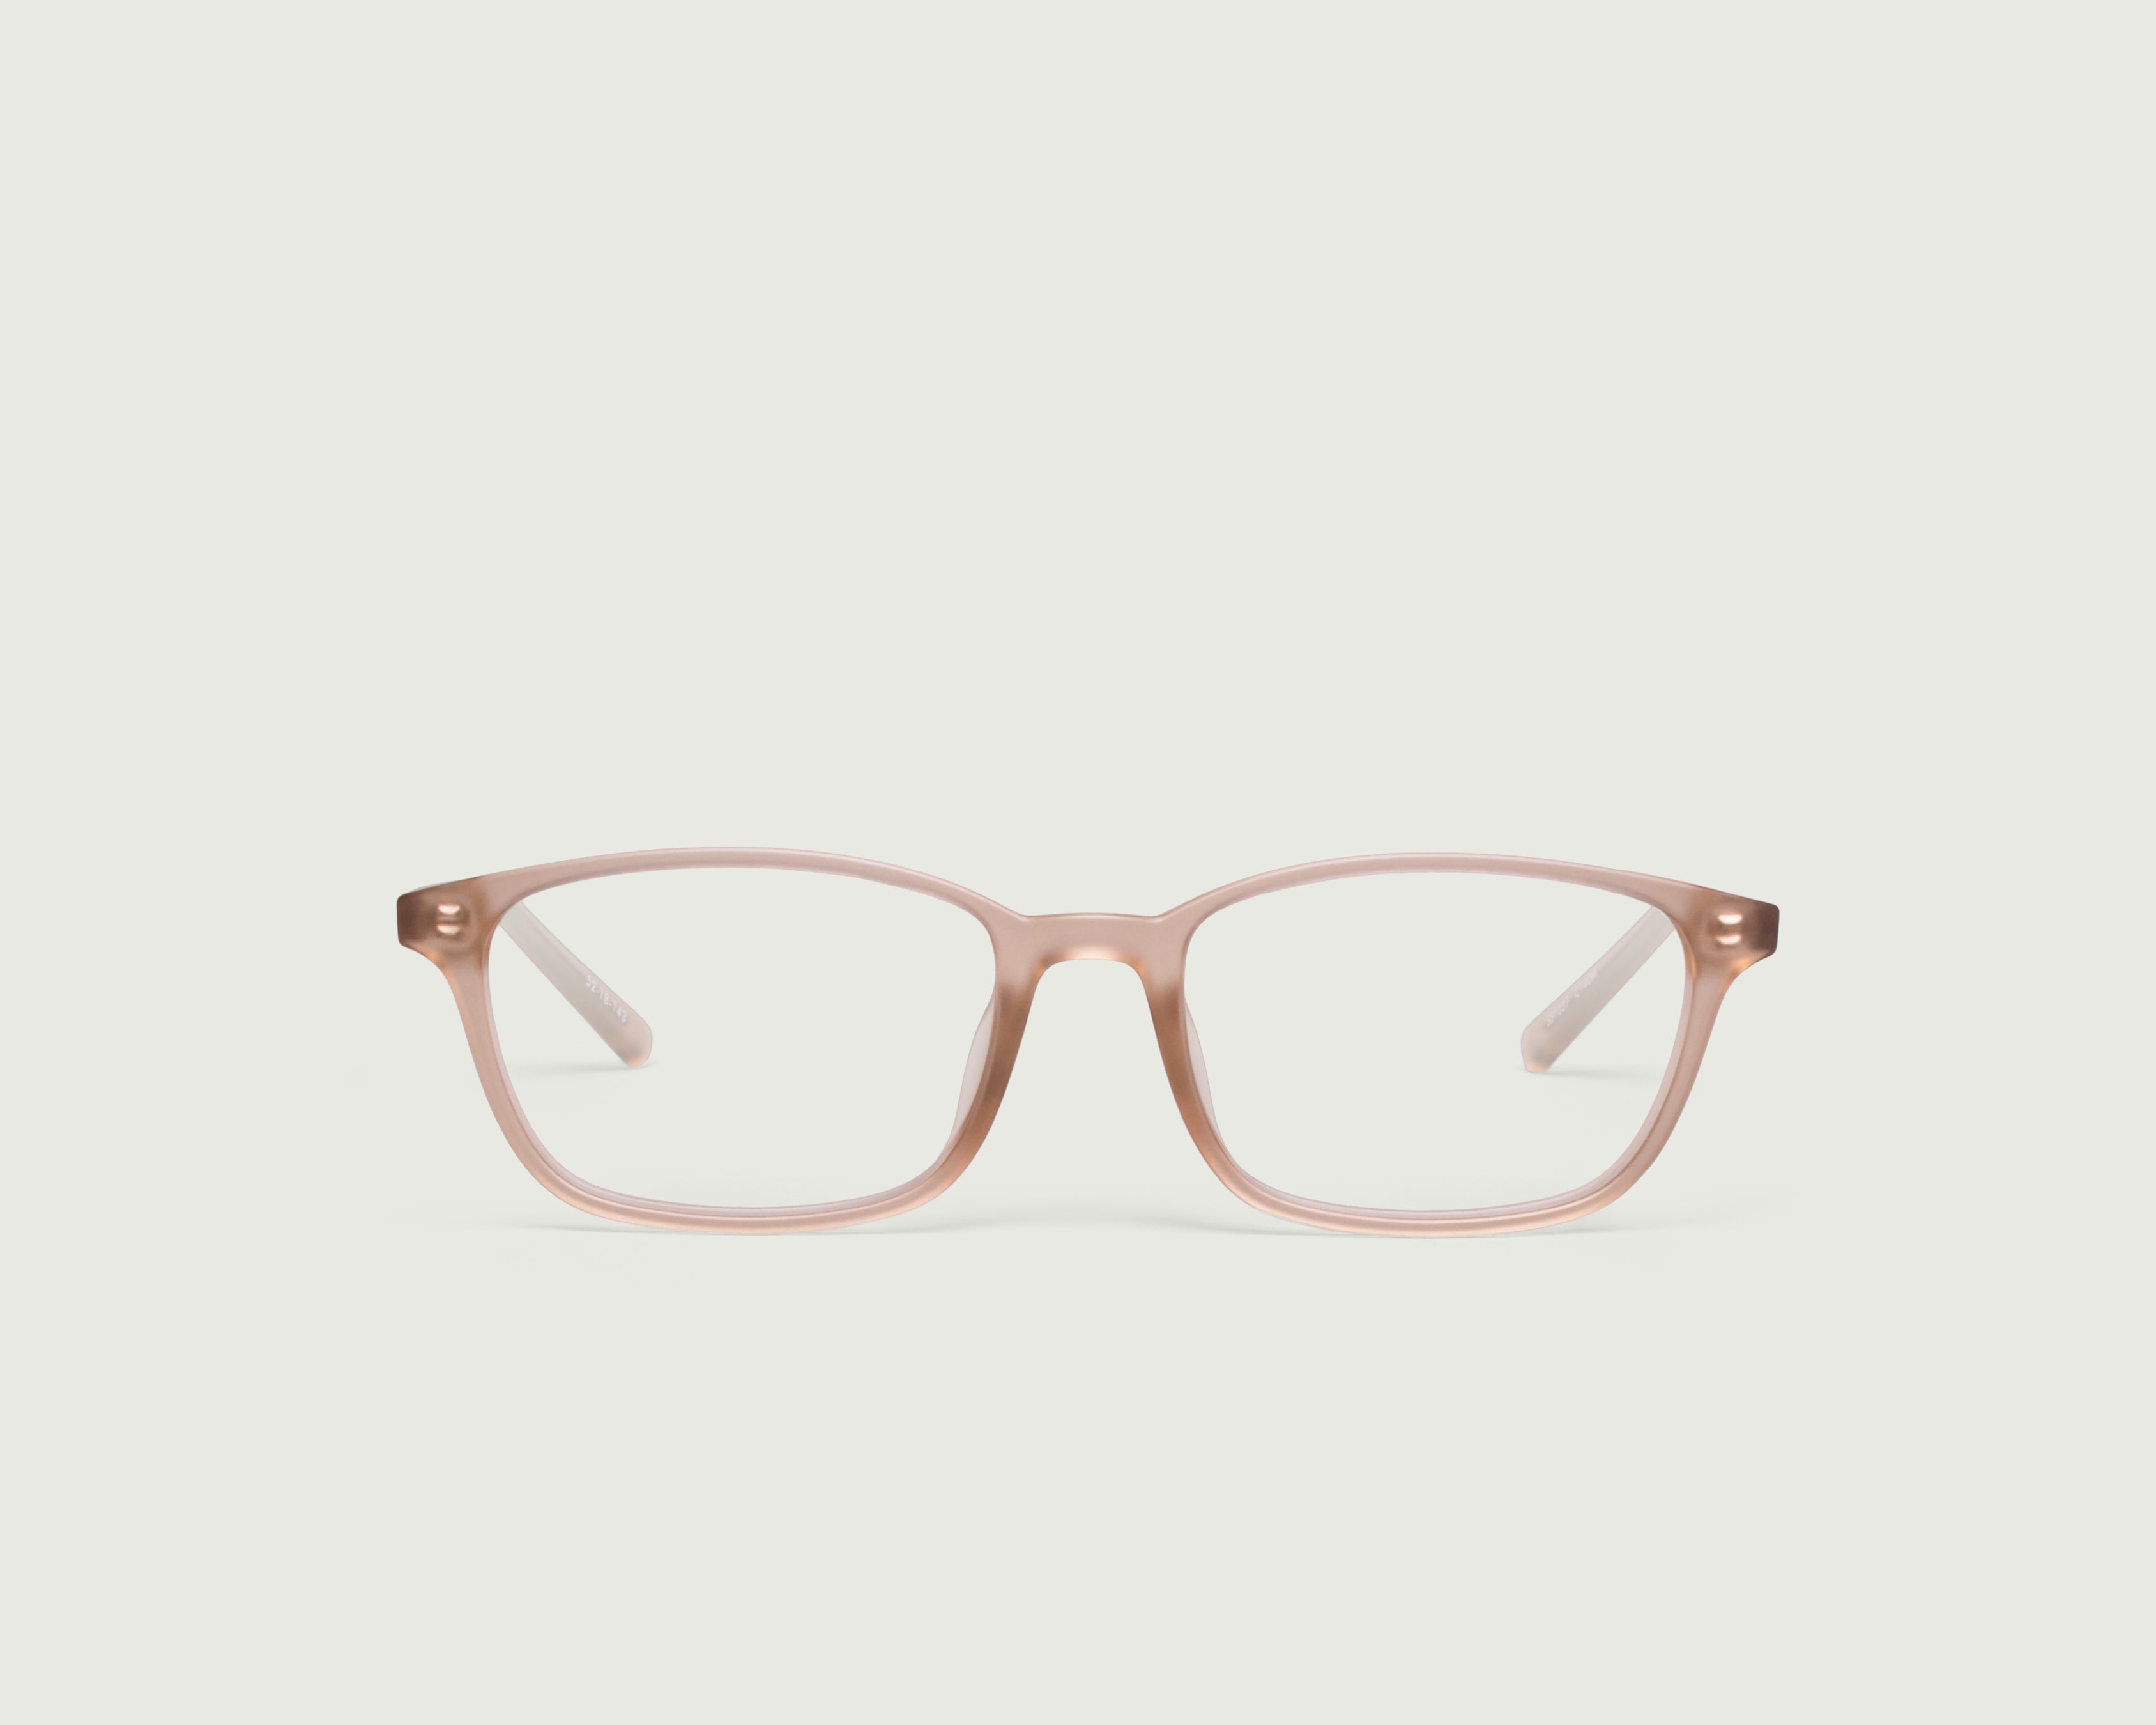 Pomelo::Neal Eyeglasses rectangle nude plastic front (4687758557238)